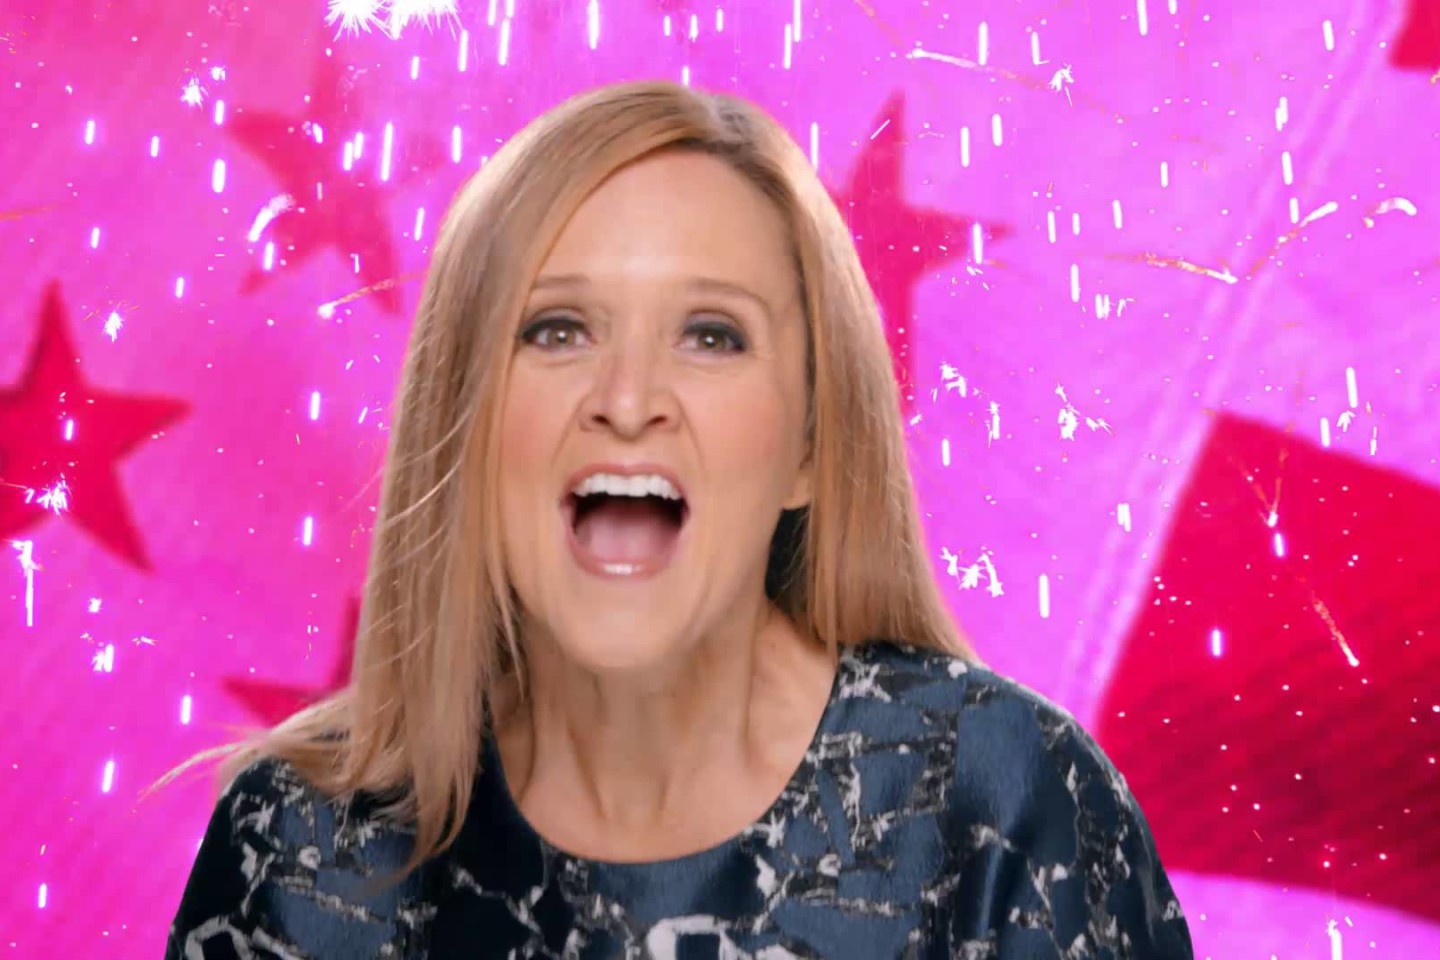 Samantha Bee Made Her Debut as the Only Female Late Night TV Host